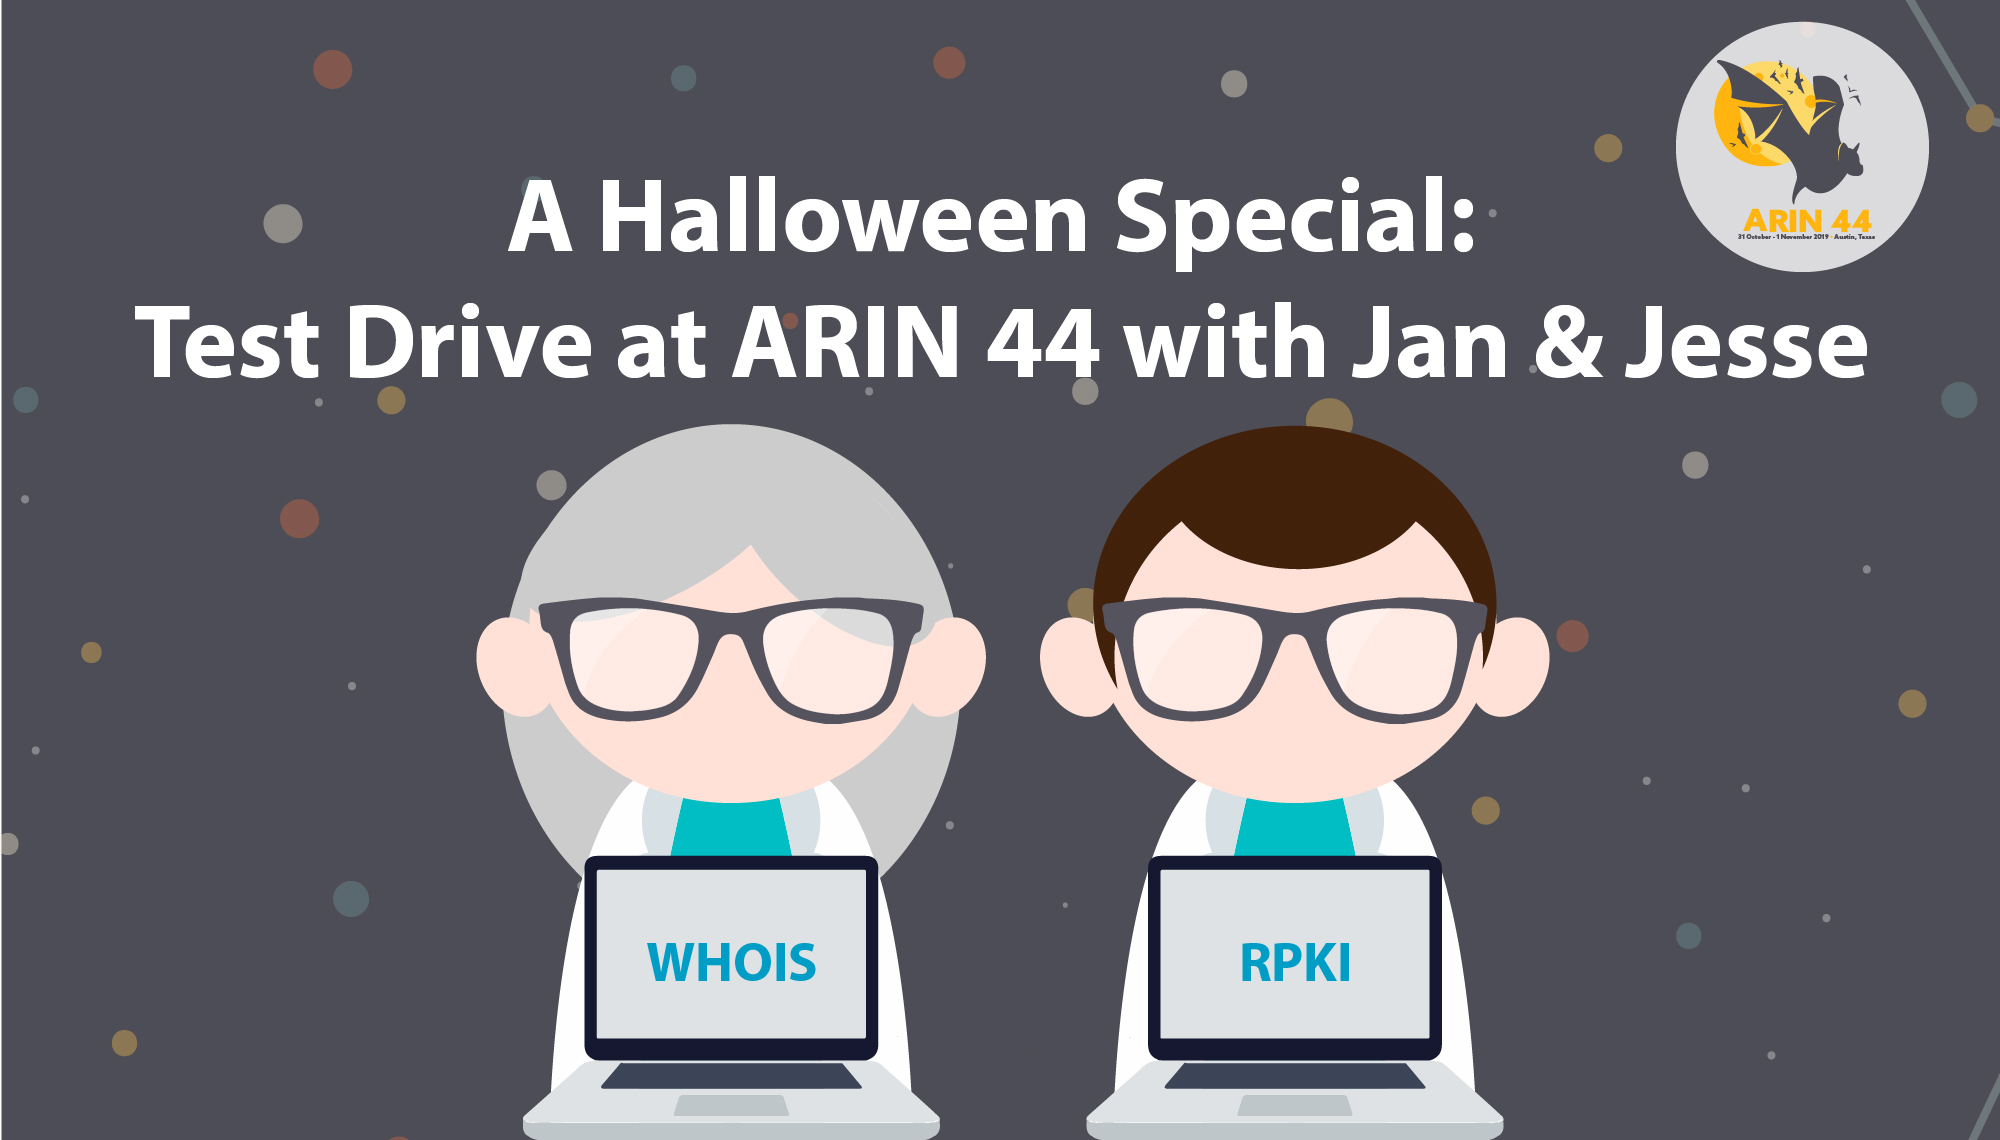 A Halloween Special: Test Drive at ARIN 44 with Jan & Jesse